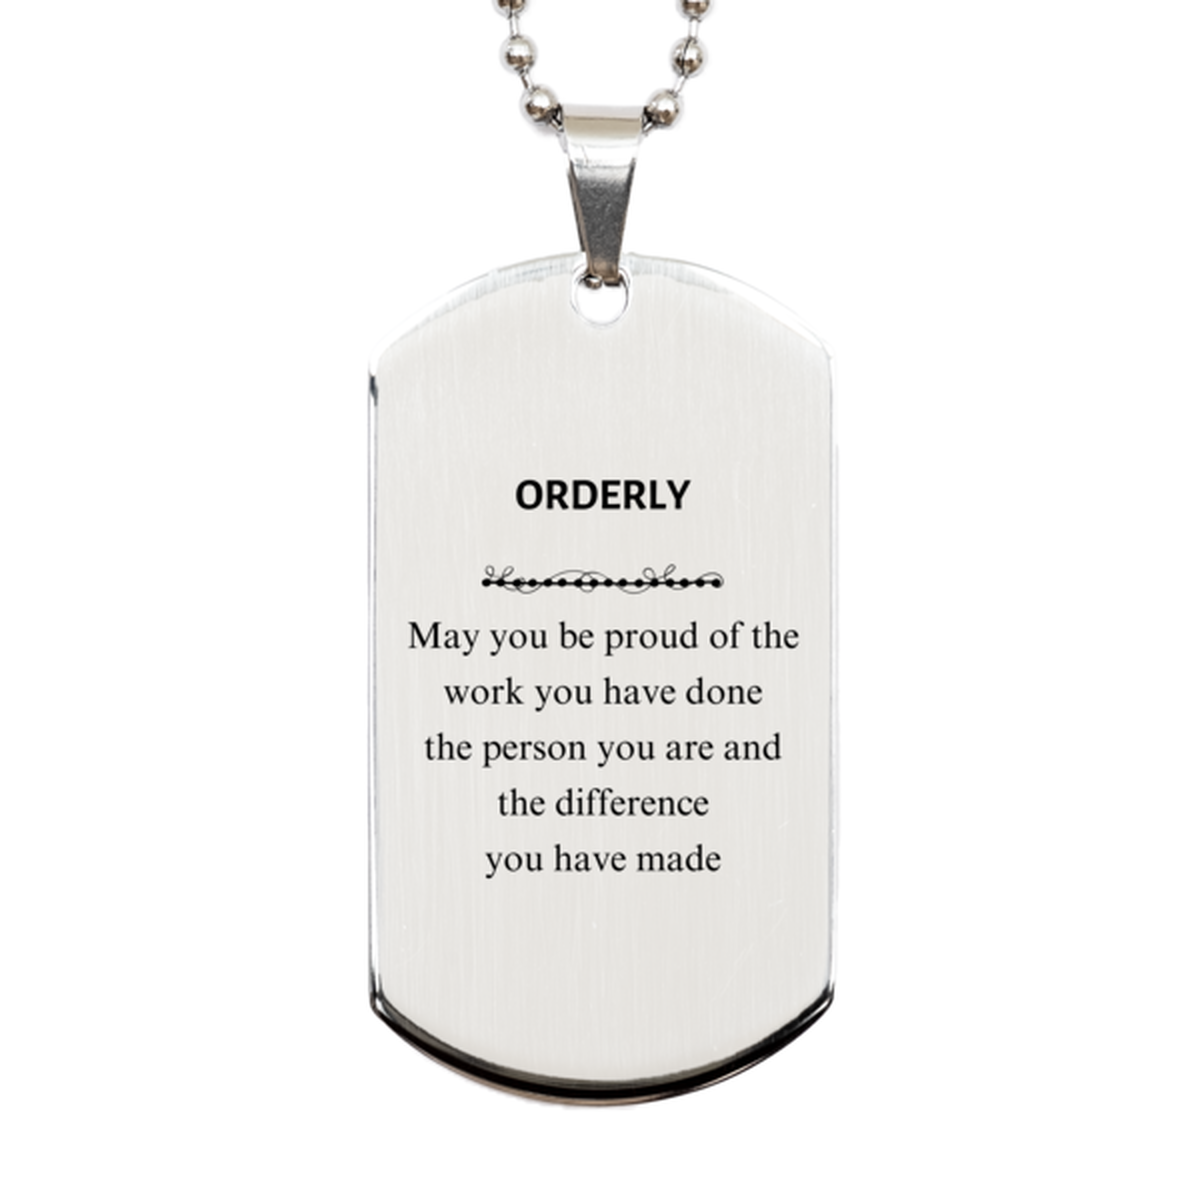 Orderly May you be proud of the work you have done, Retirement Orderly Silver Dog Tag for Colleague Appreciation Gifts Amazing for Orderly